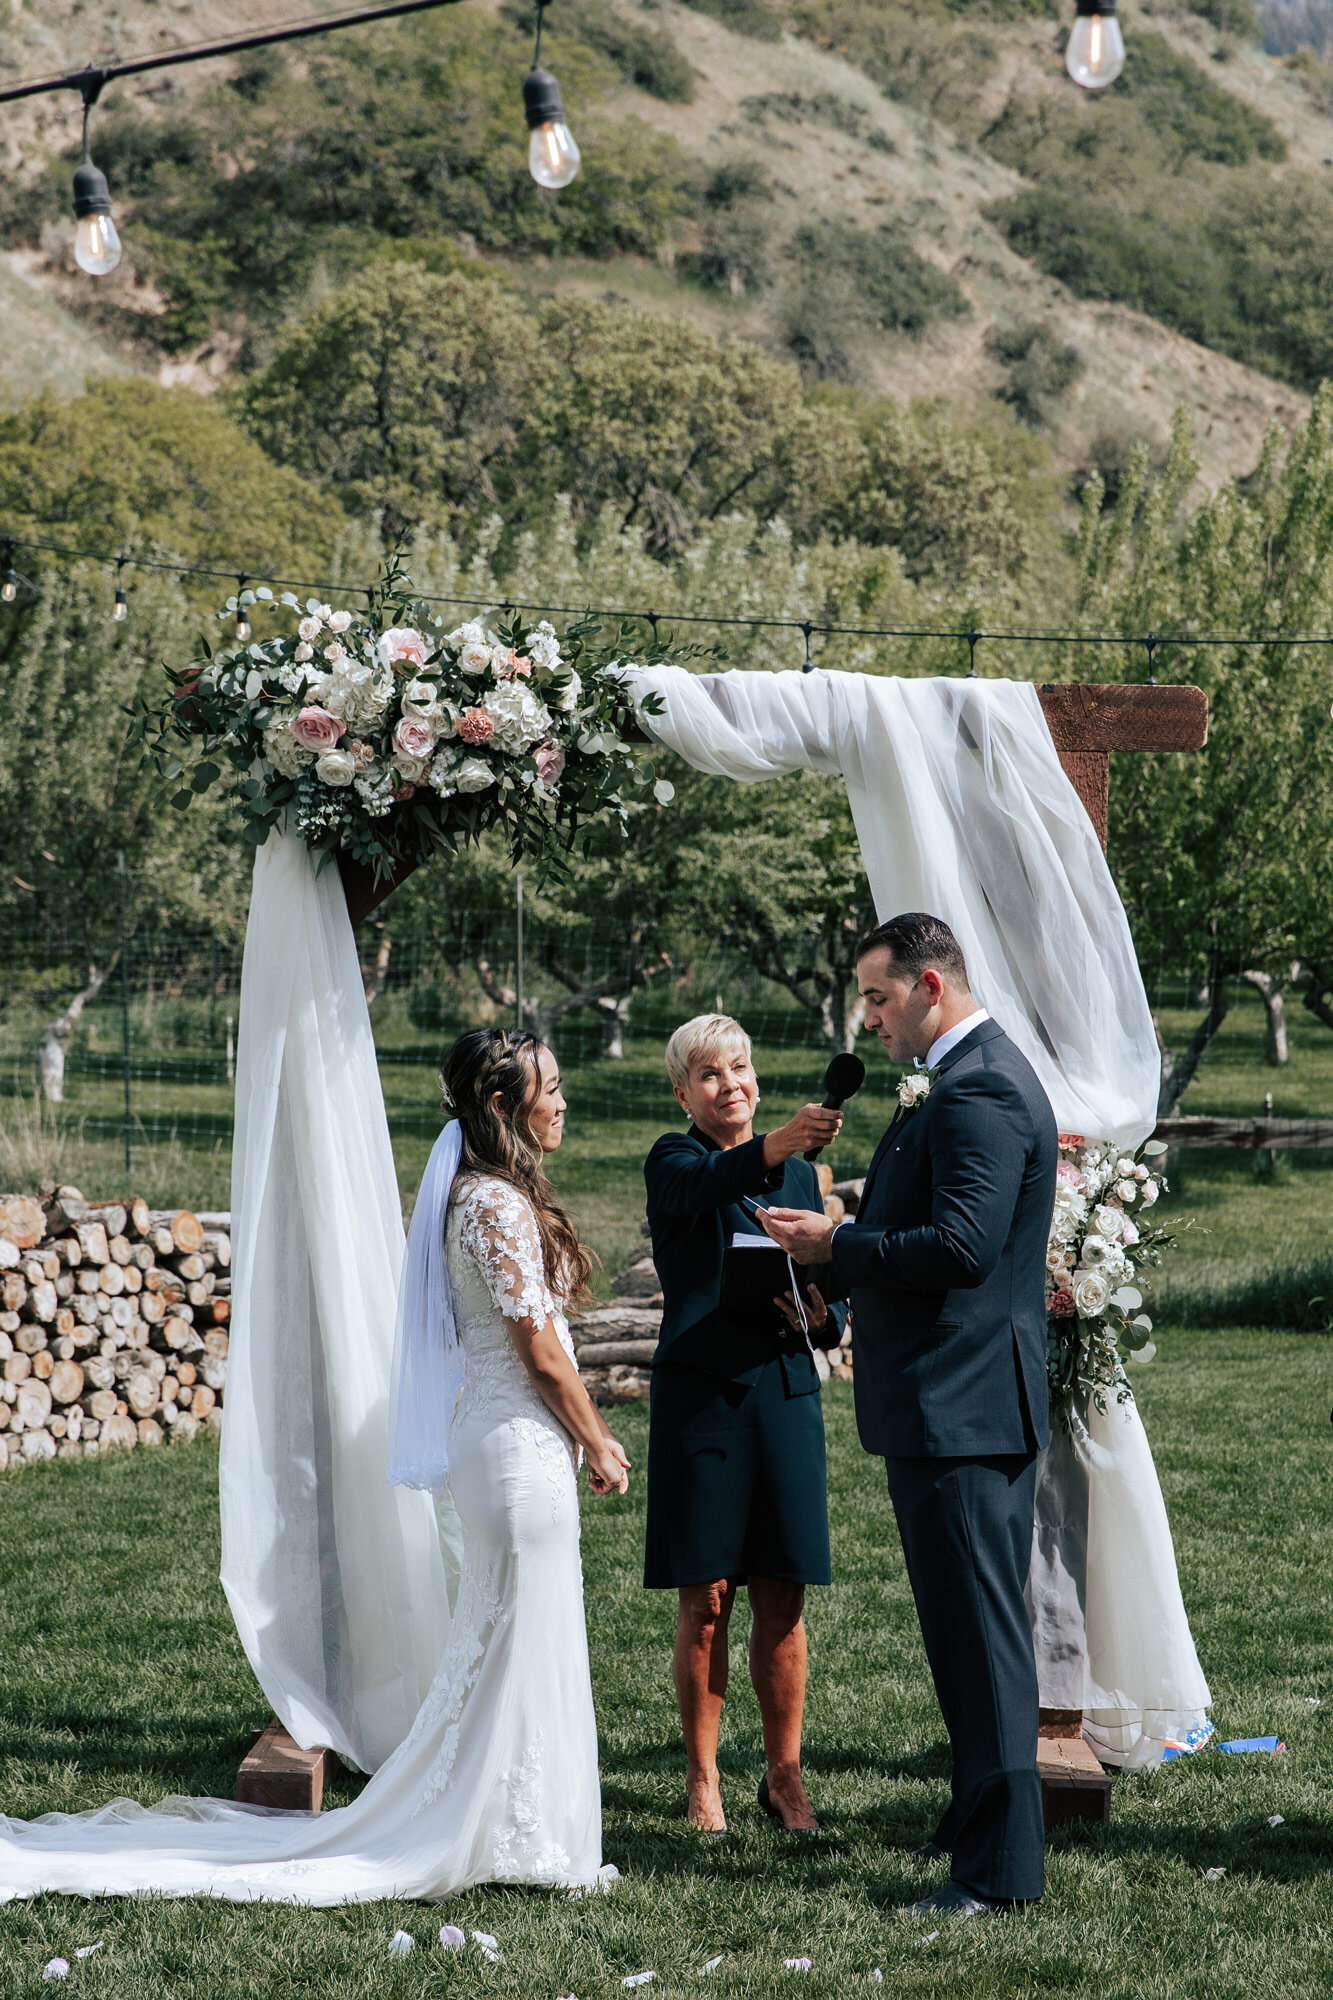  Pastor holds the microphone for the groom as he reads his vows with a white tulle altar with roses on it at Quiet Meadow Farms by Emily Jenkins Photography. groom reads vows Utah summer wedding flower petals #emilyjenkinsphotography #emilyjenkinswed